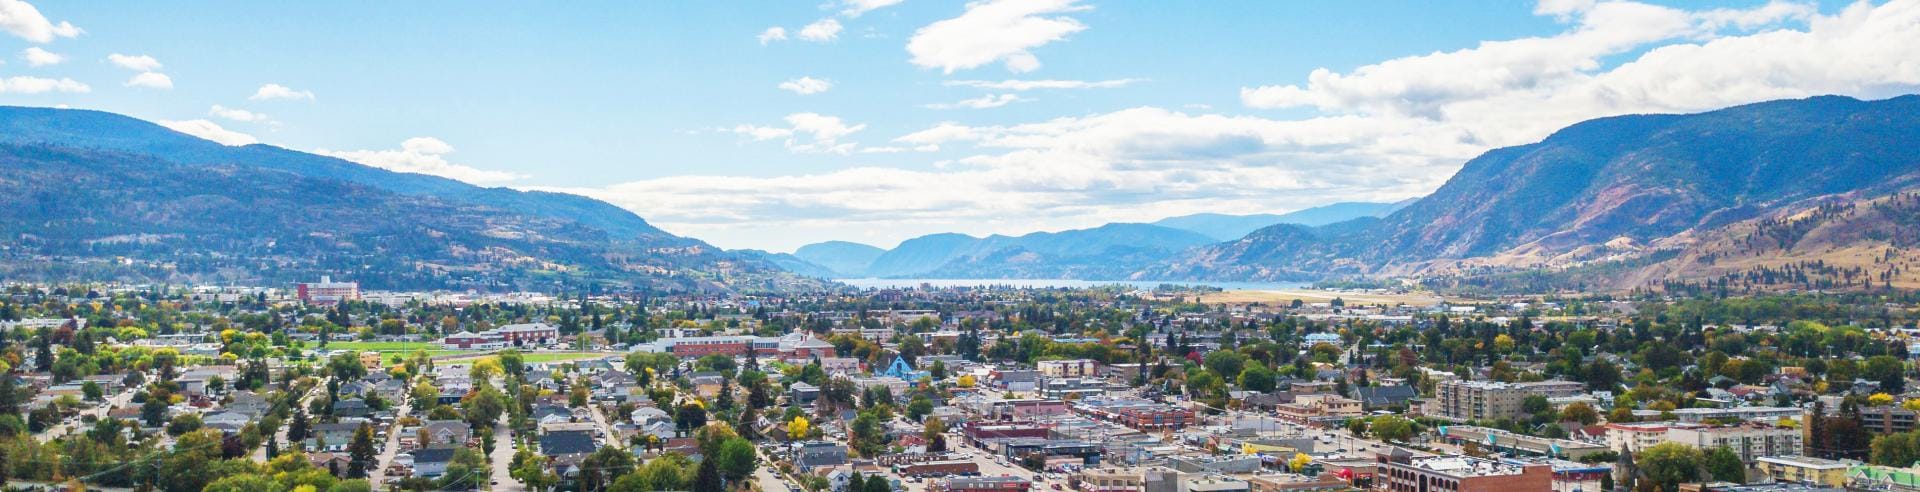 Aerial view of Penticton in the summer